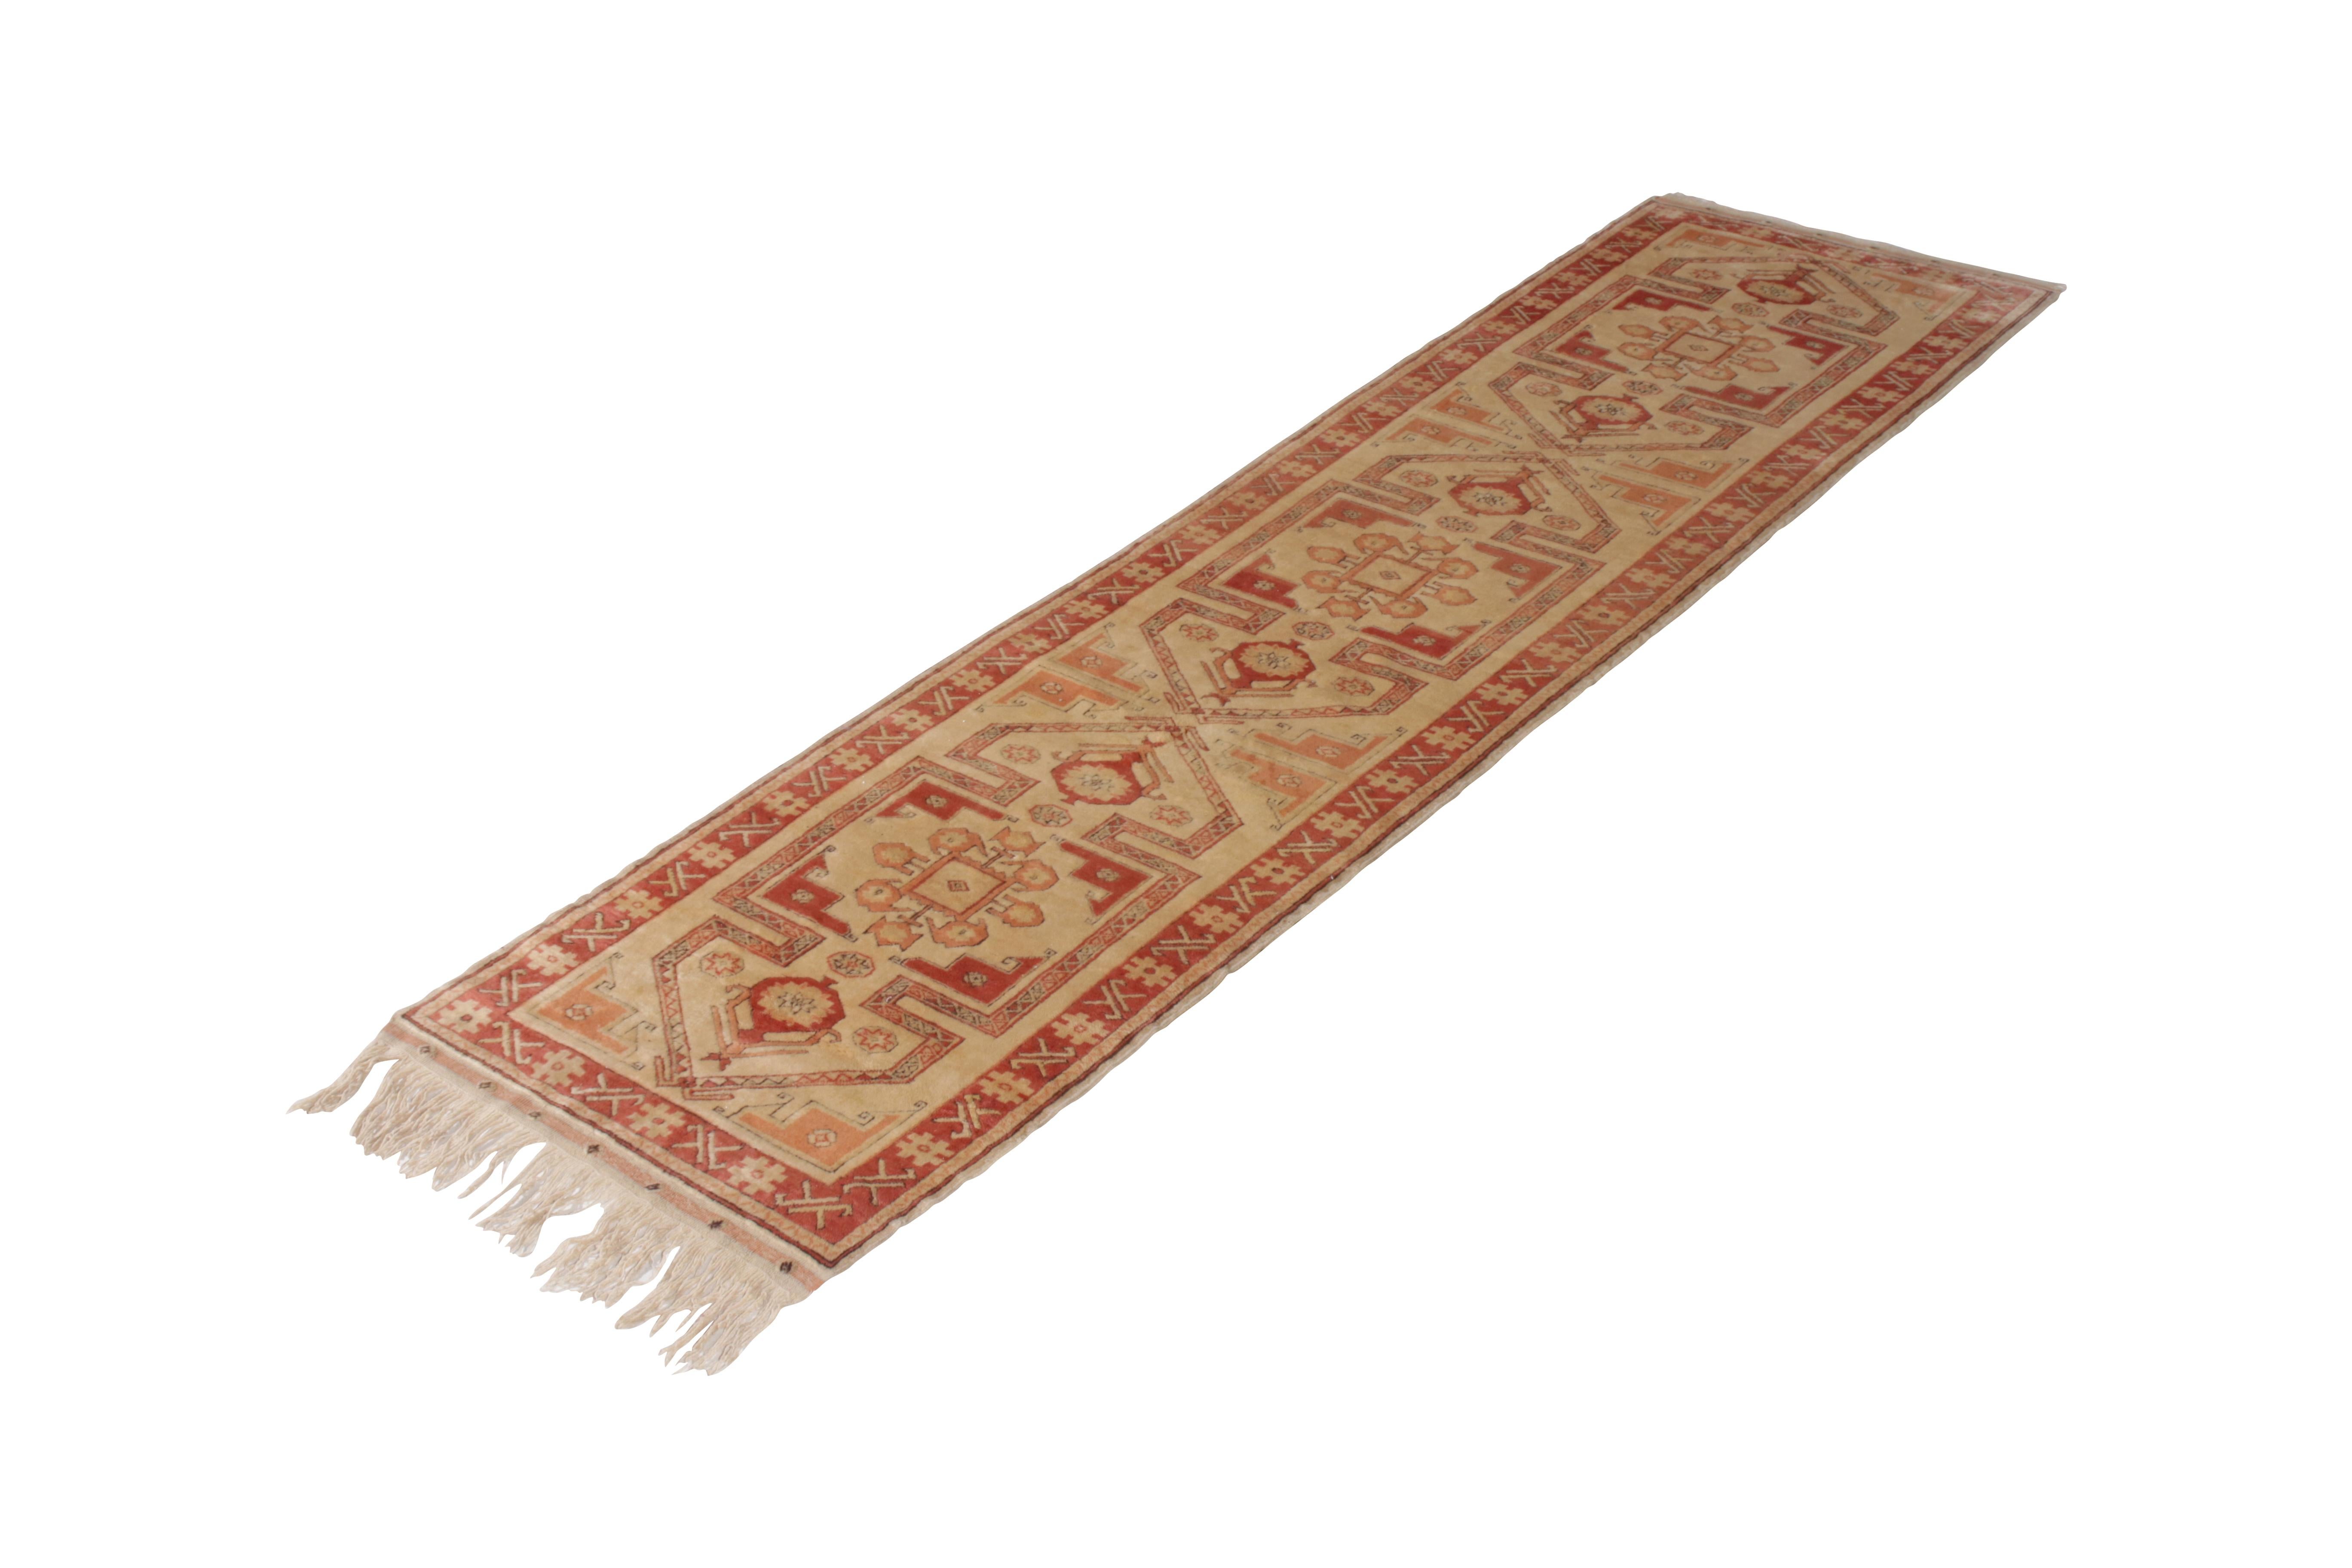 Hand knotted in wool originating from Turkey circa 1950-1960, this vintage runner connotes a midcentury Kazak rug design, one of the most celebrated families of Turkish and Oriental rugs seldom seen in this spacious 3 x 11 runner length so suited to